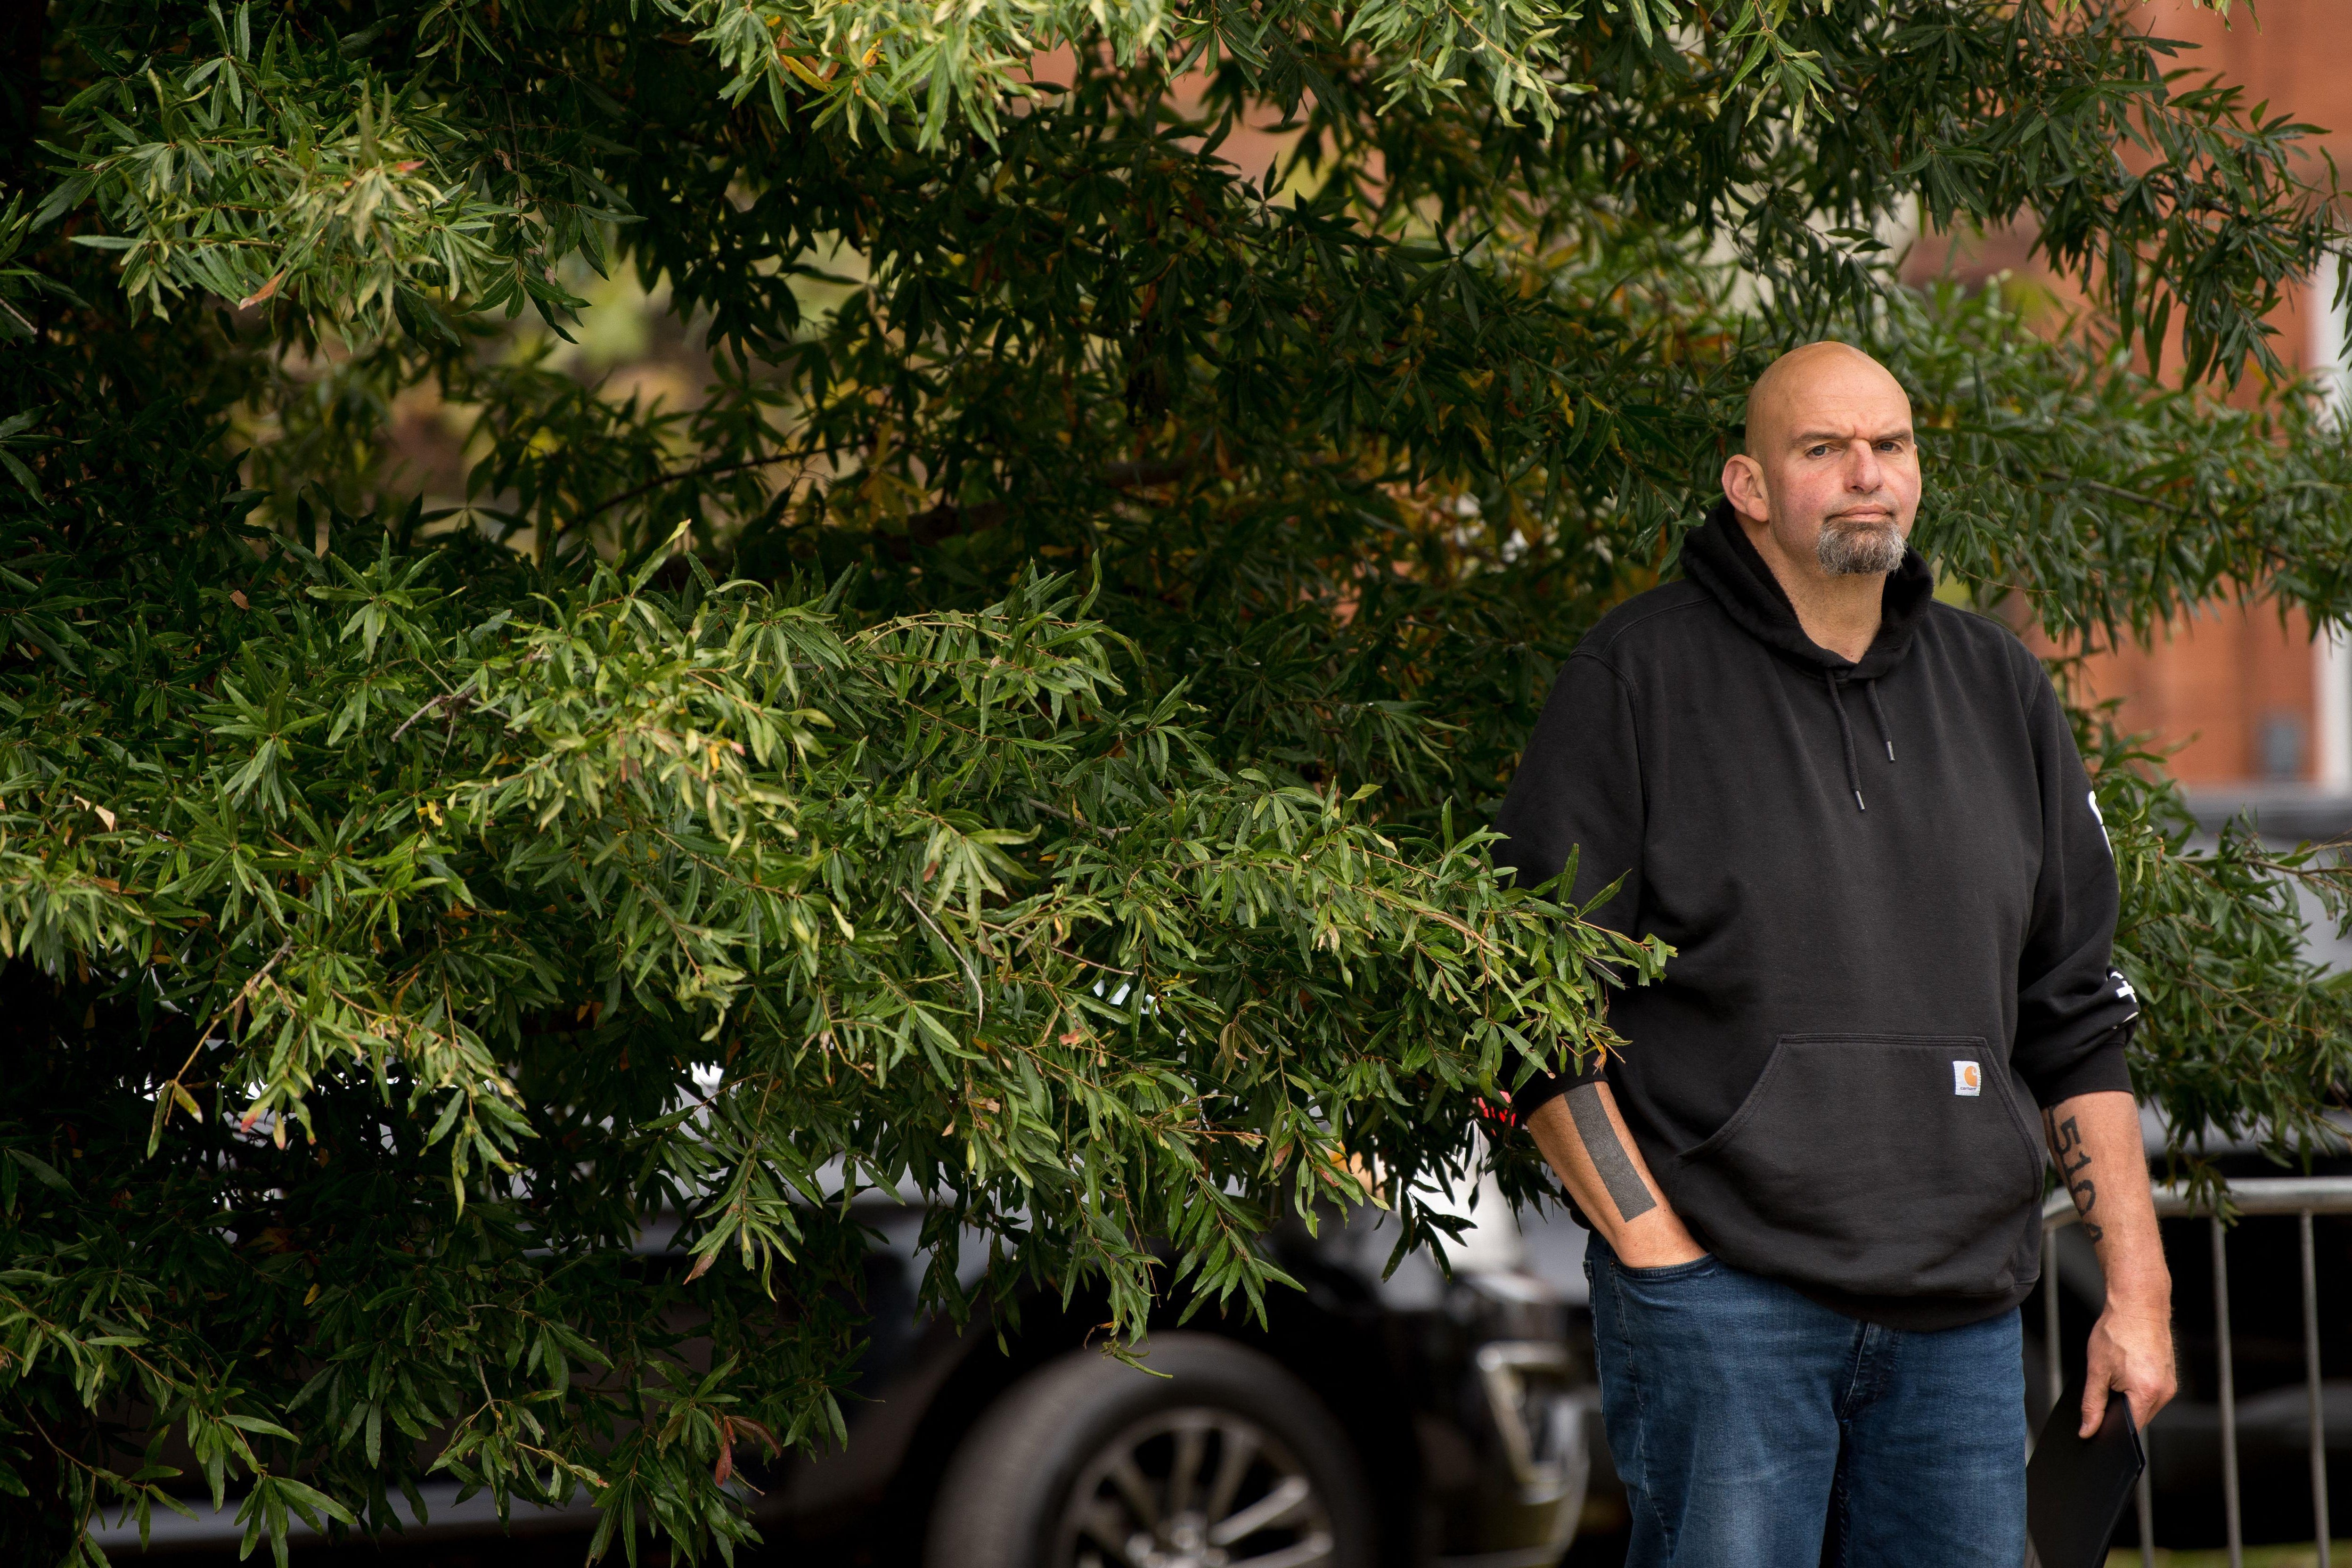 Pennsylvania's Lieutenant Governor John Fetterman waits to speak to supporters gathered in Dickinson Square Park in Philadelphia on October 23, 2022, as he campaigns for the US Senate. - The US midterm election is scheduled for November 8, 2022. (Photo by Kriston Jae Bethel / AFP) (Photo by KRISTON JAE BETHEL/AFP via Getty Images)